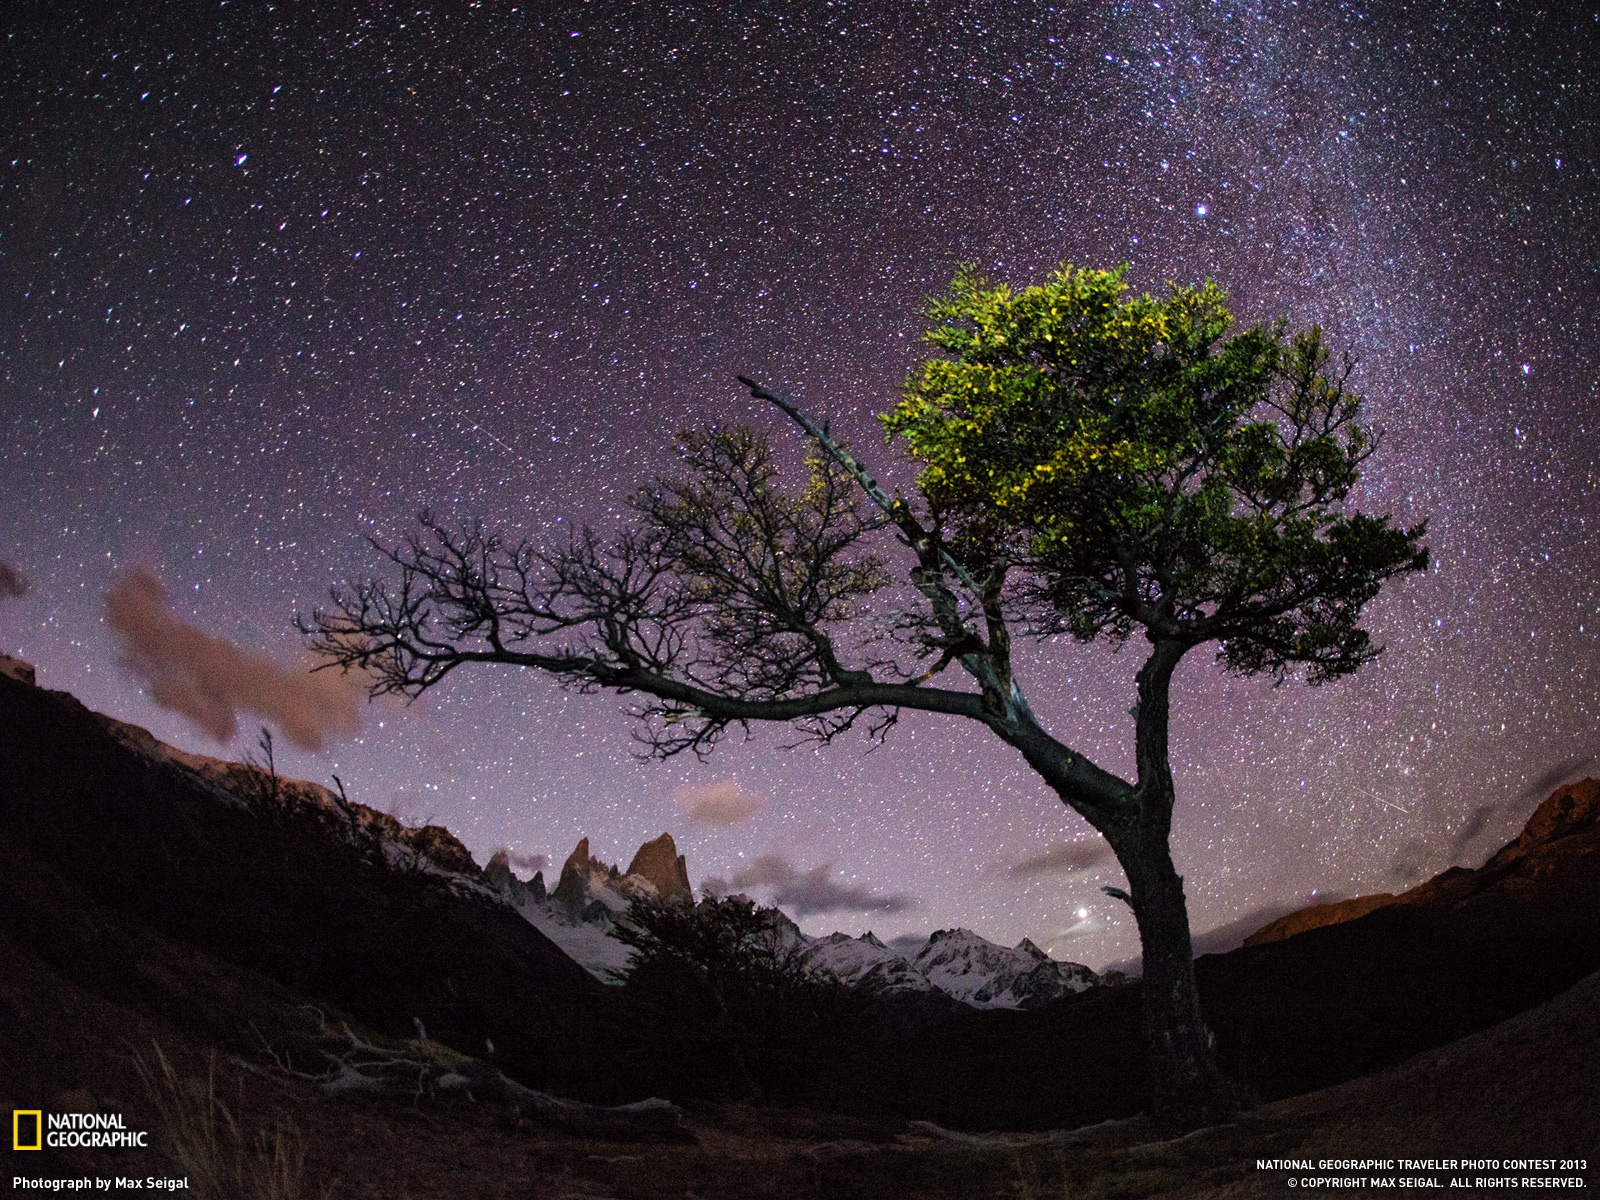  Photo    Patagonia Wallpaper    National Geographic Photo of the Day